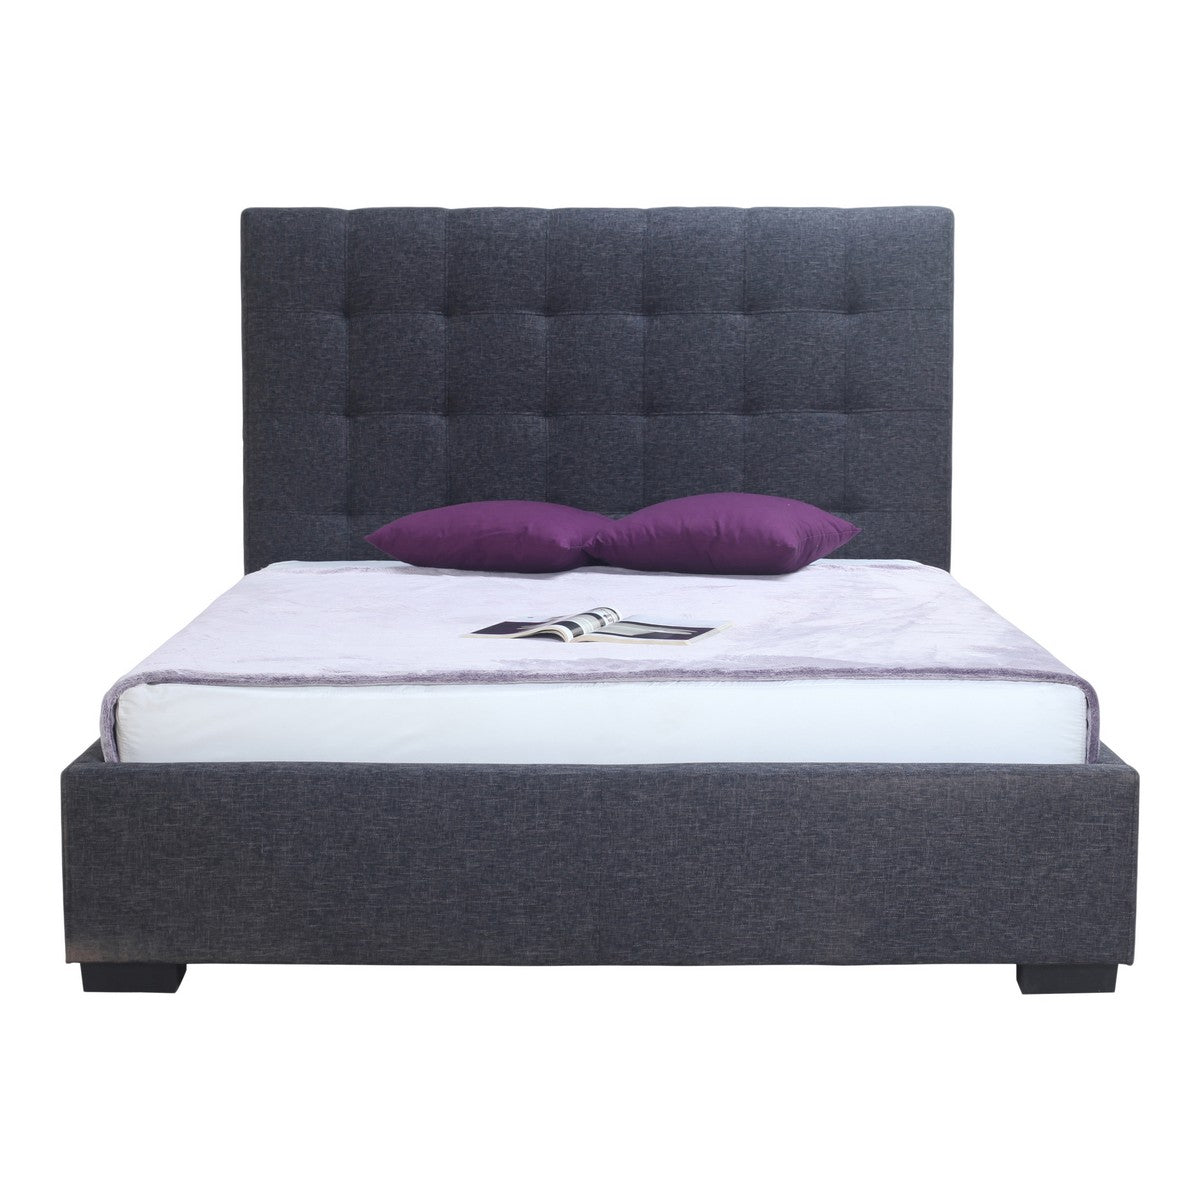 Moe's Home Collection Belle Storage Bed Queen Charcoal Fabric - RN-1000-25 - Moe's Home Collection - Beds - Minimal And Modern - 1